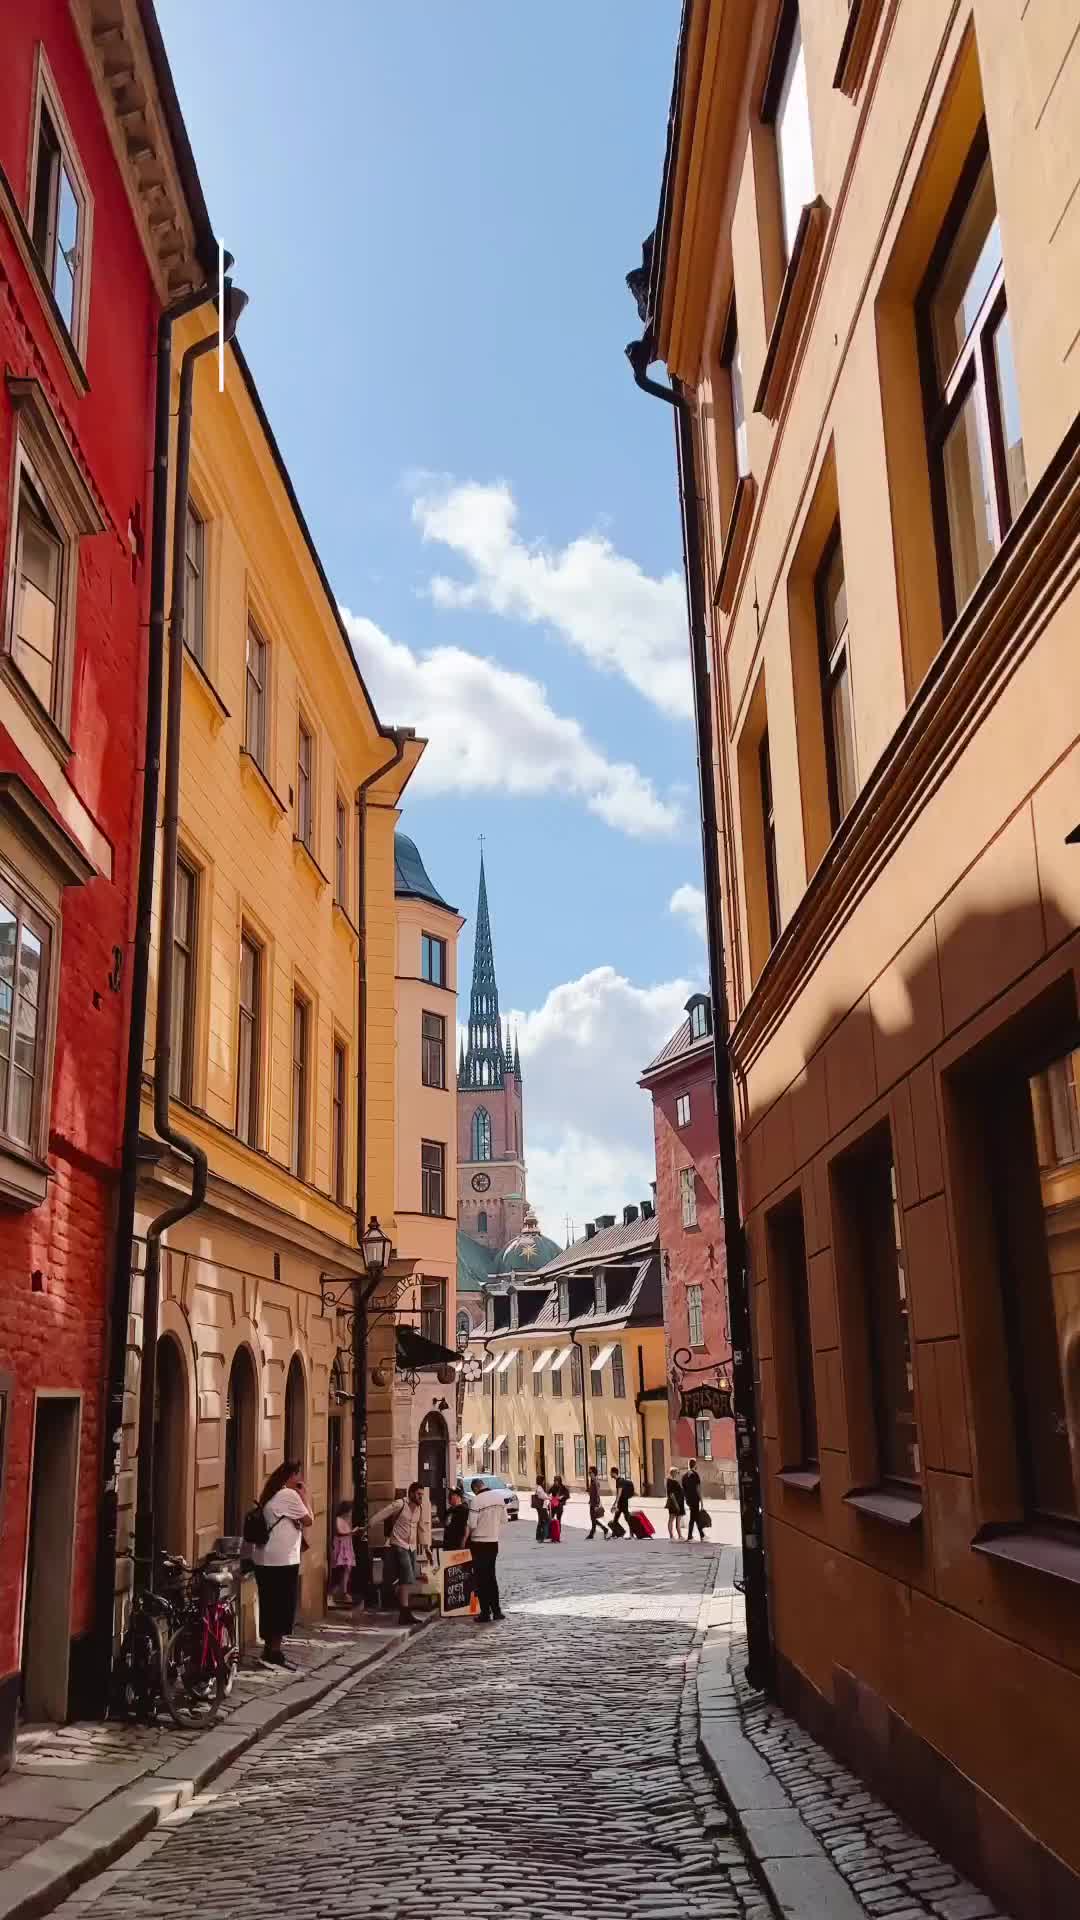 Discover Stockholm's Charming Old Town in Just Hours